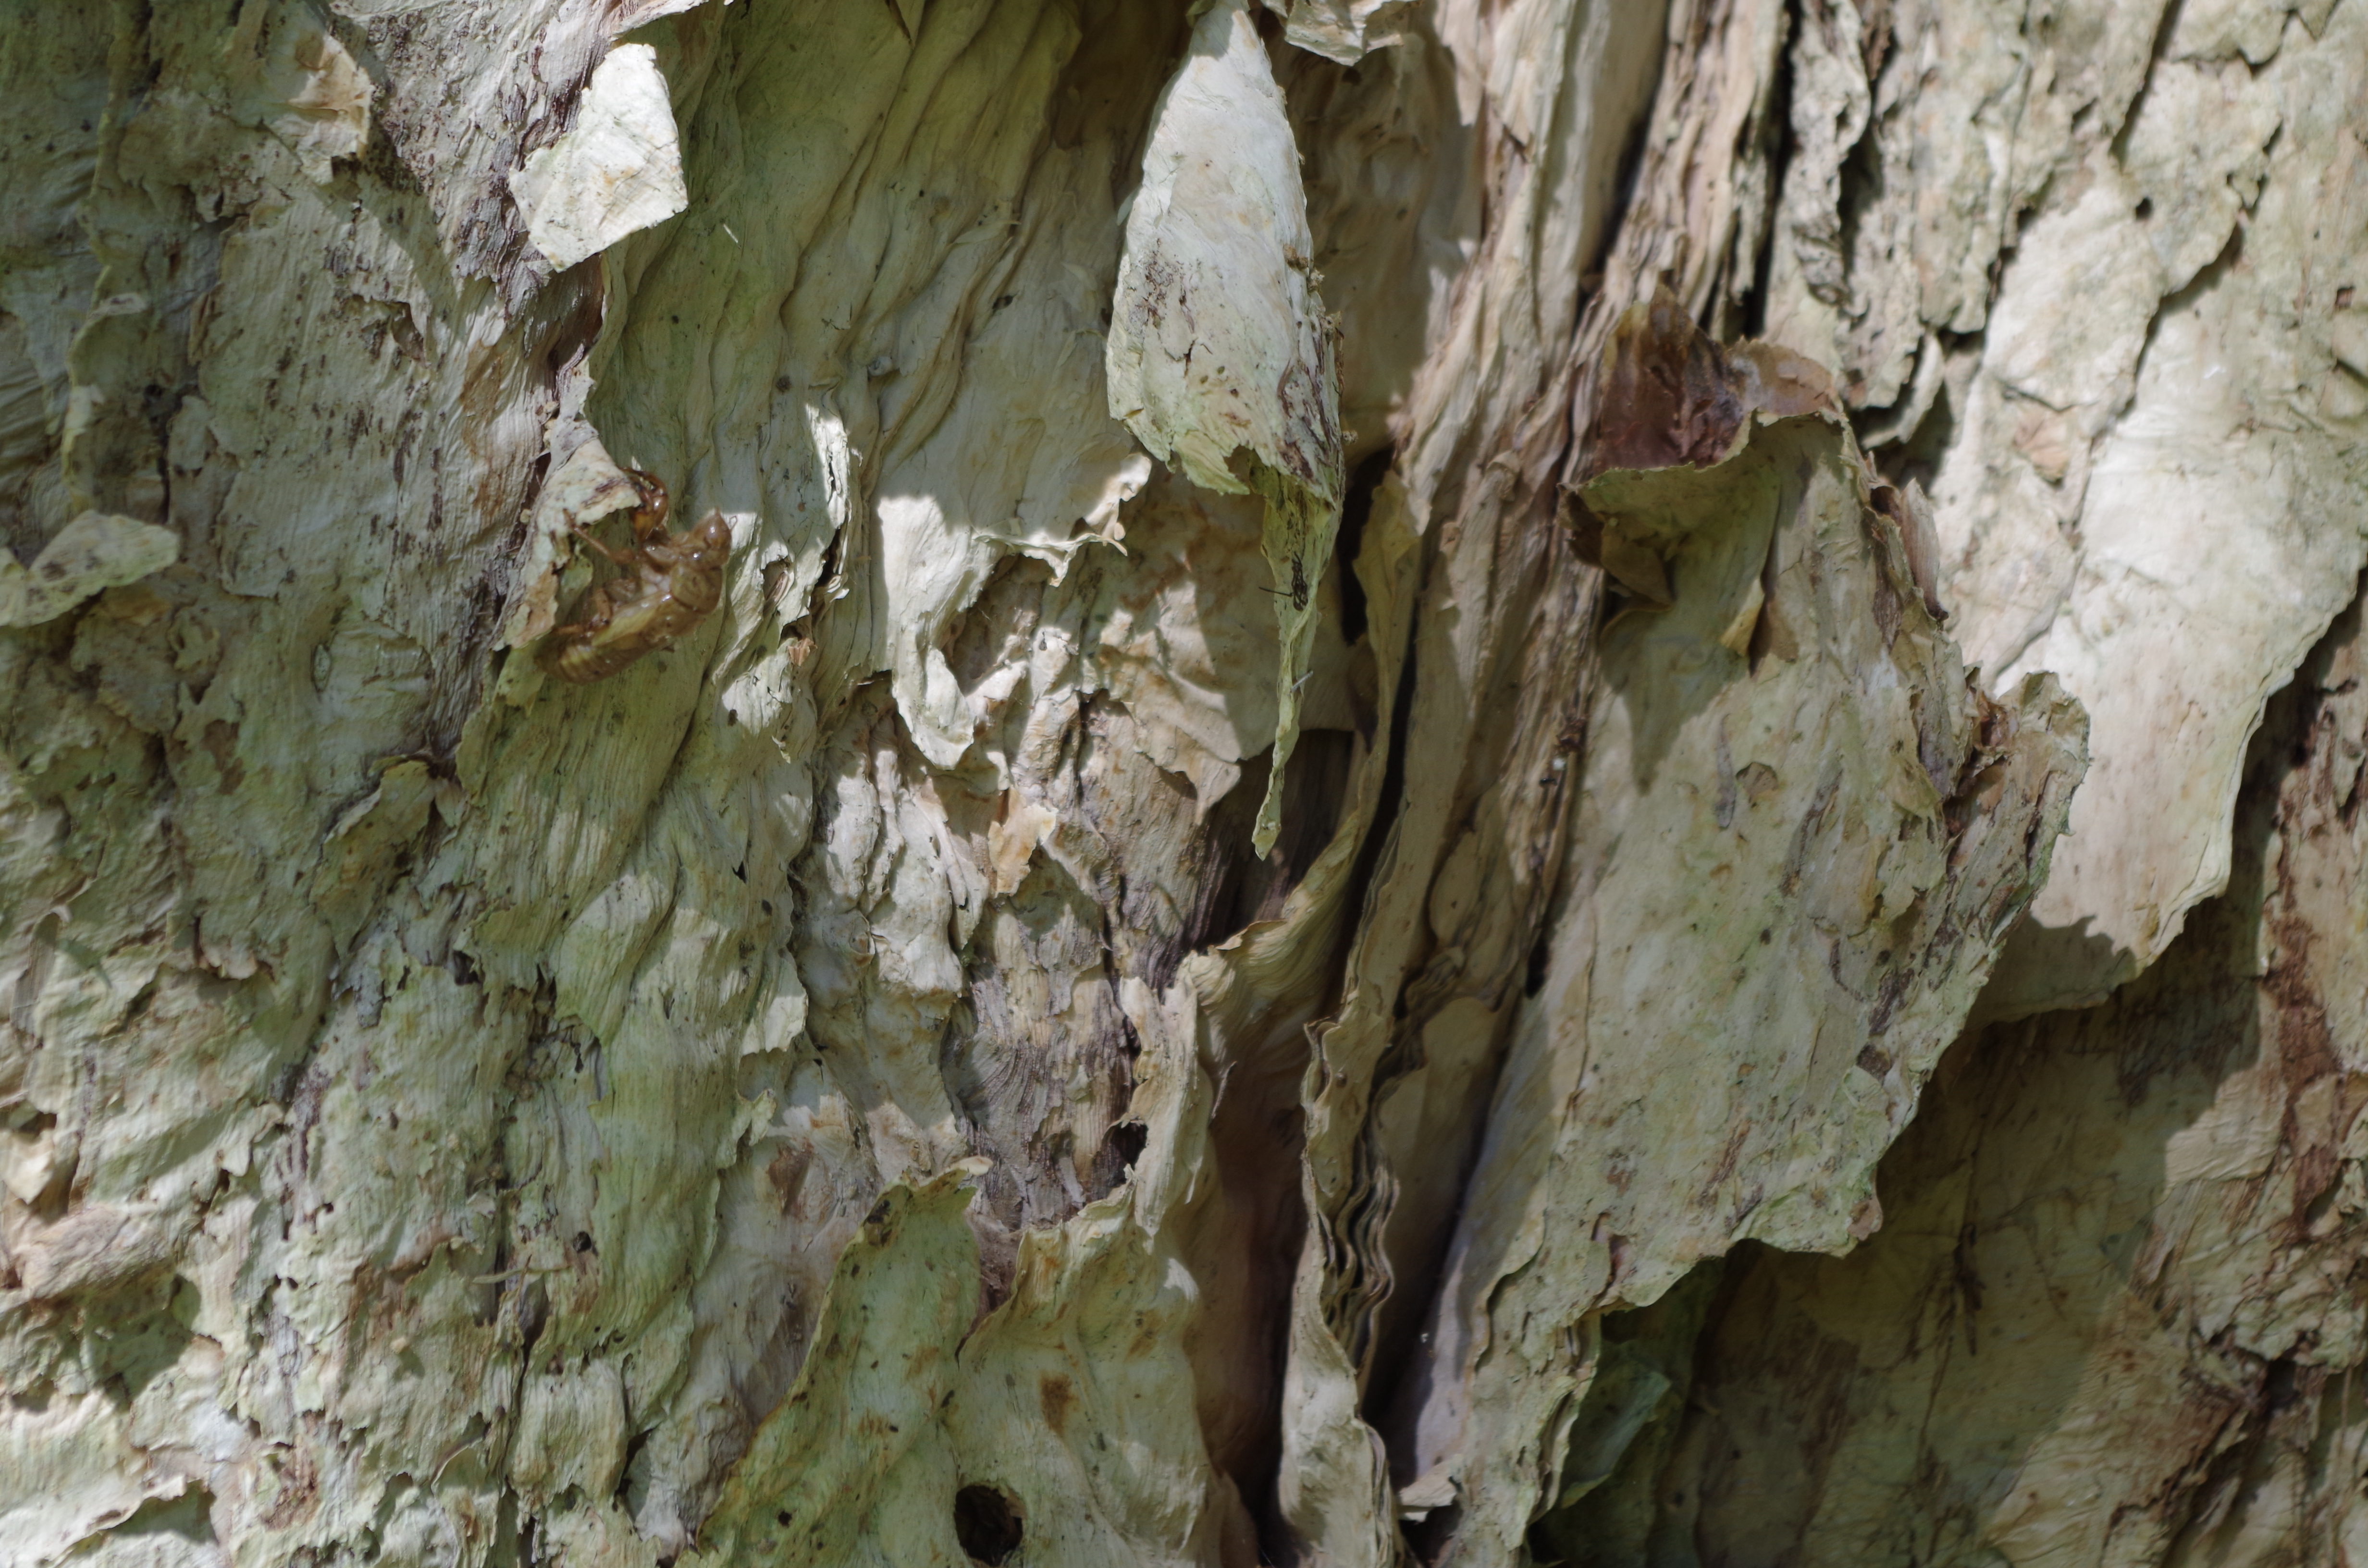 Close up of the bark of a melaleuca, showing the flakey papery texture of it.